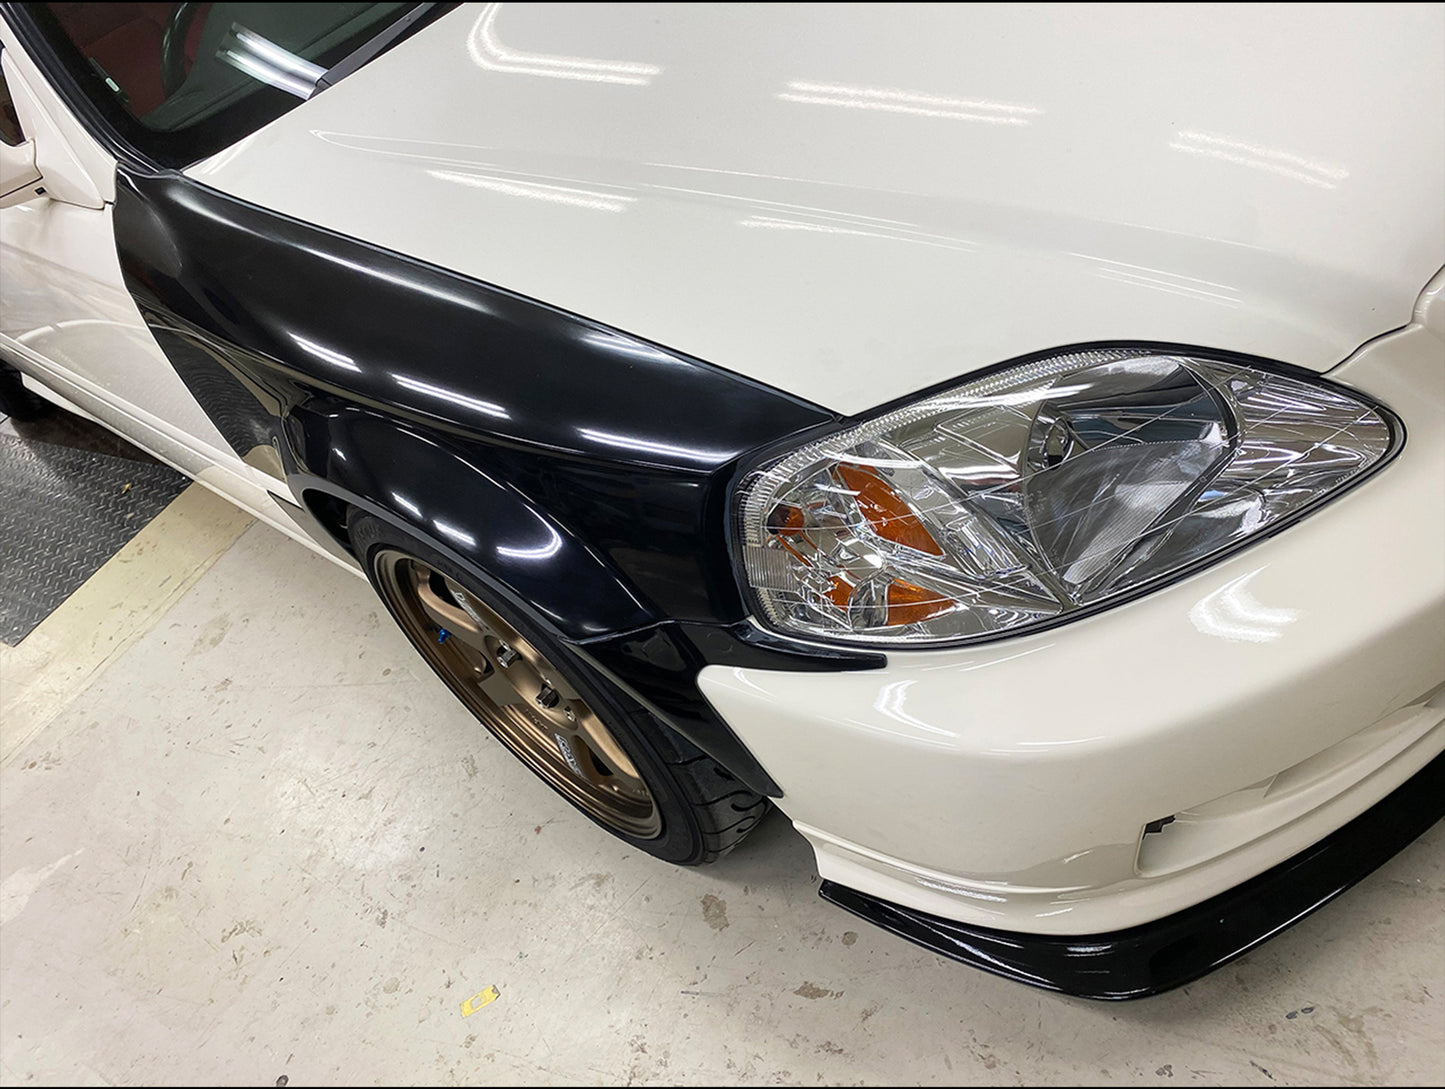 Mode Parfume Front Wide Fenders with Bumper Extensions - 99-00 Civic Hatchback